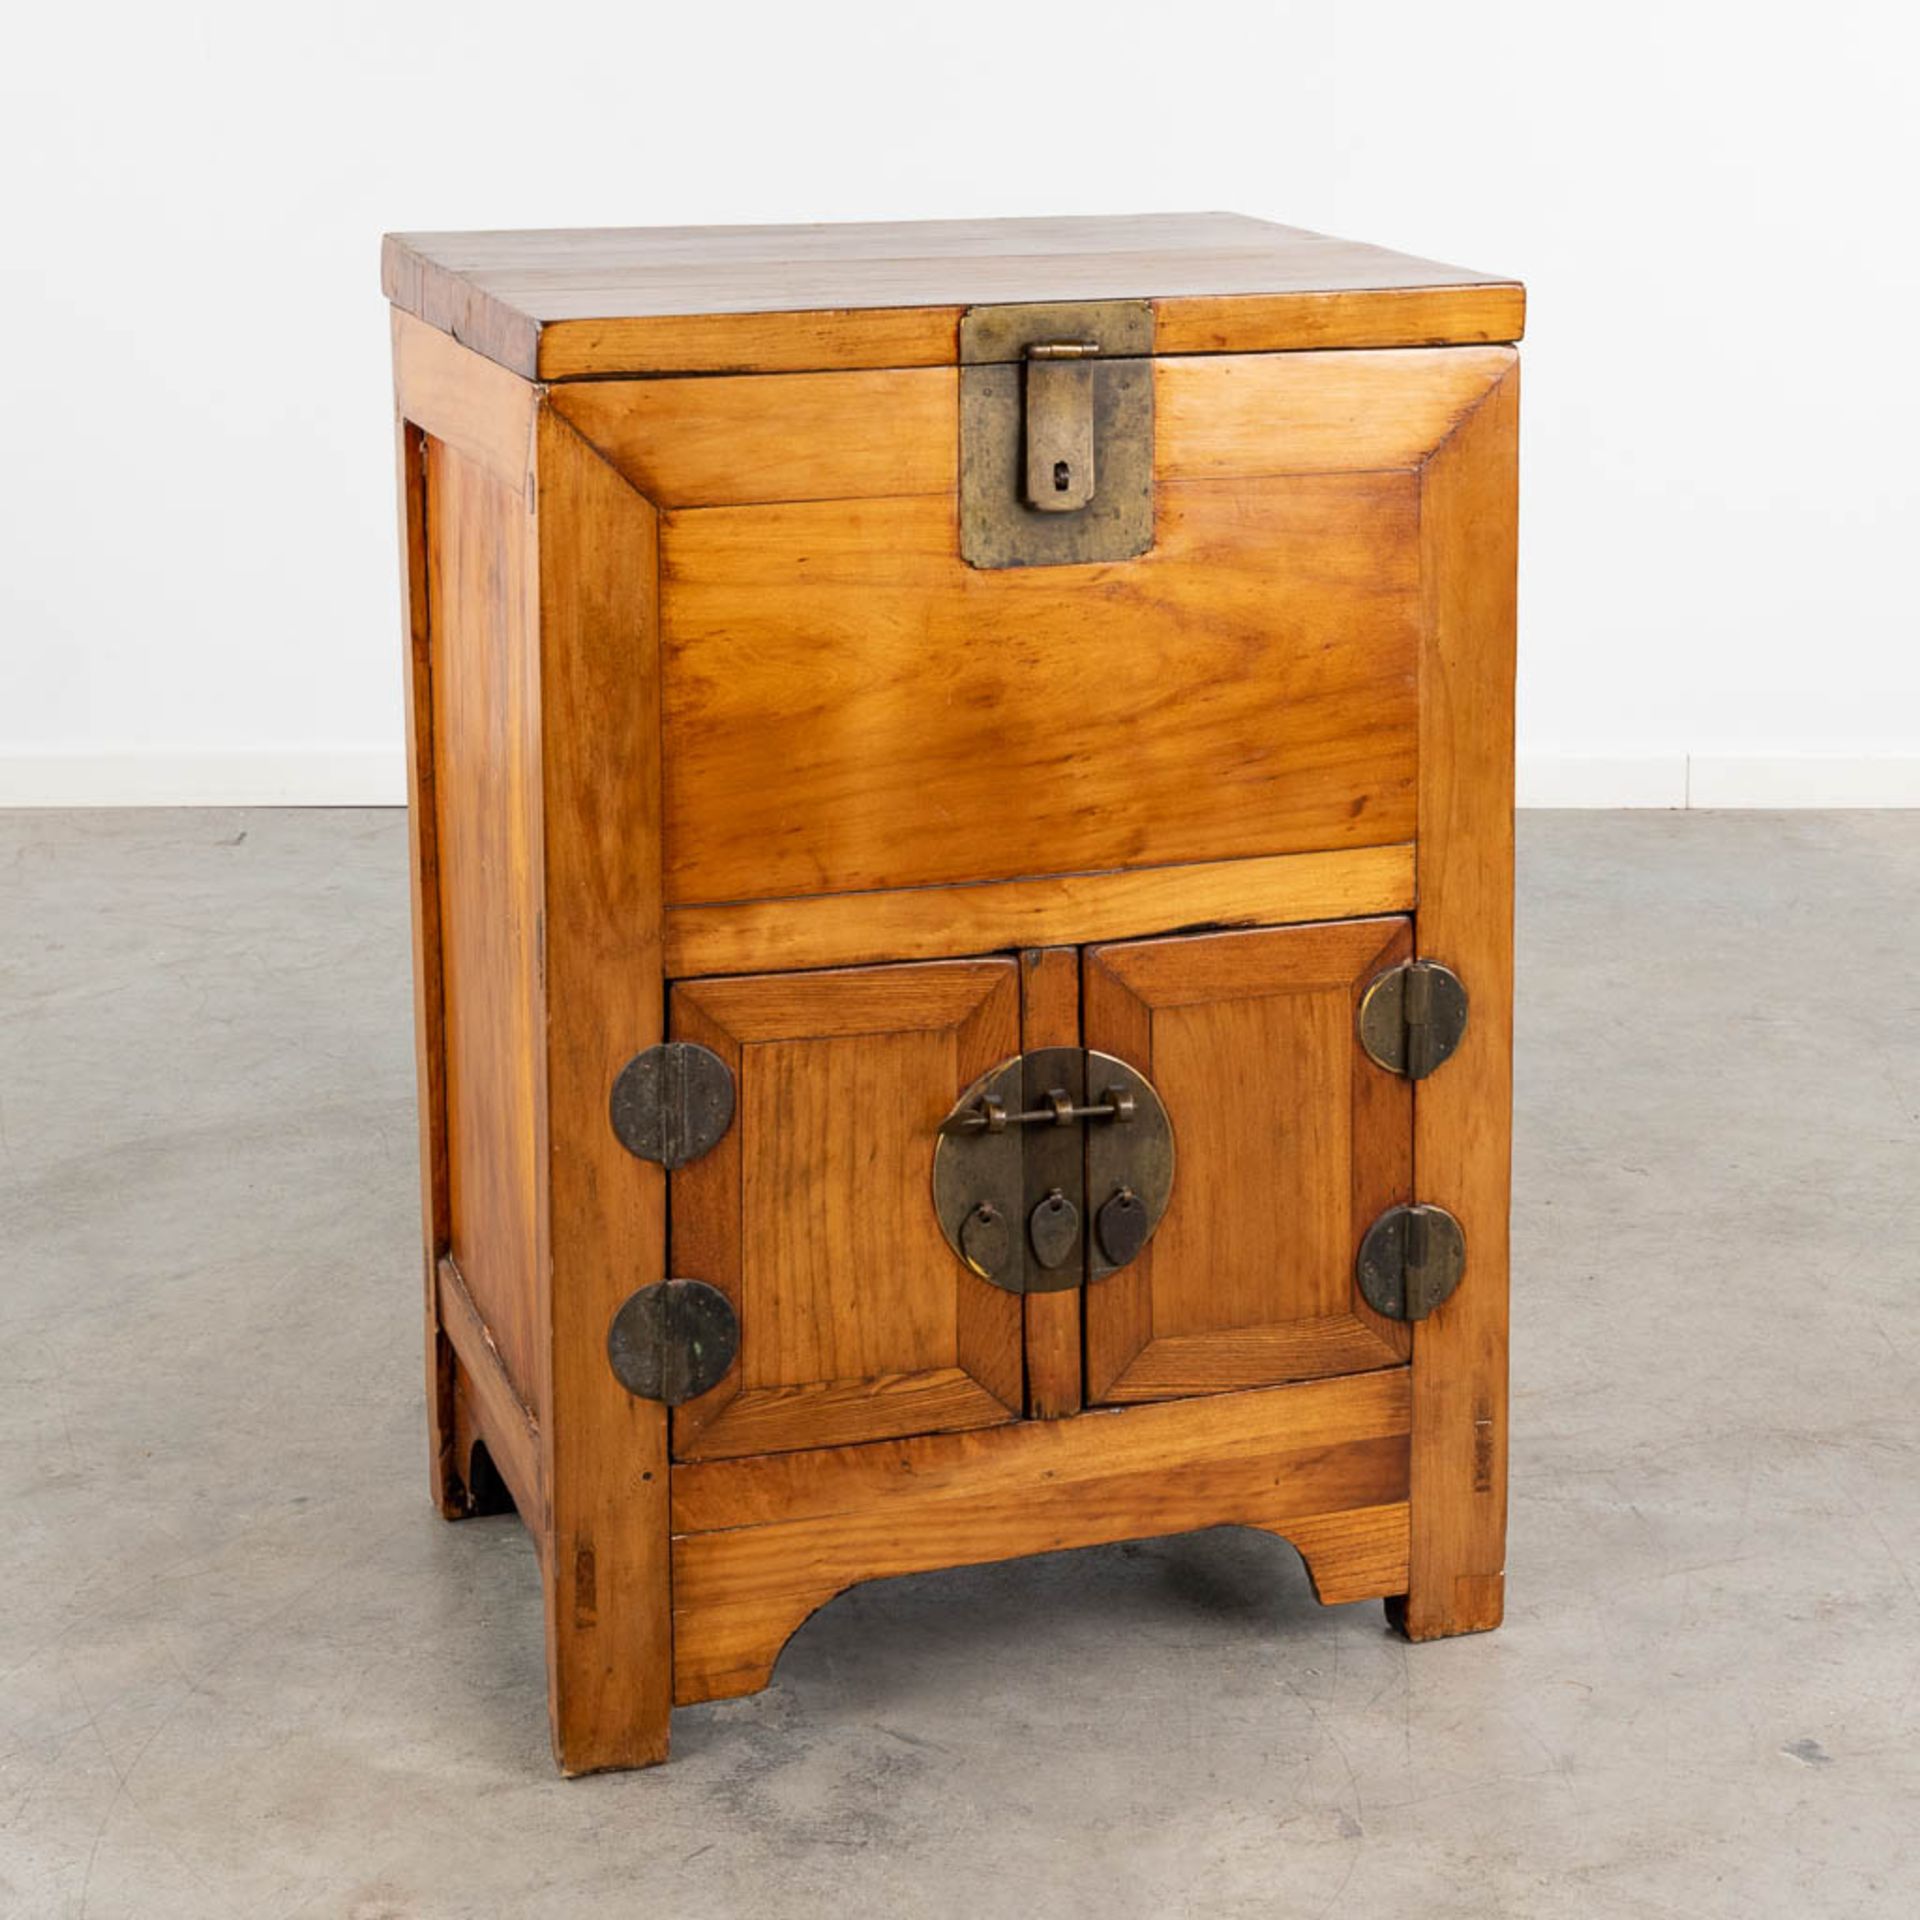 A small Chinese cabinet, hardwood with brass hardware. (L:47 x W:62 x H:88 cm)